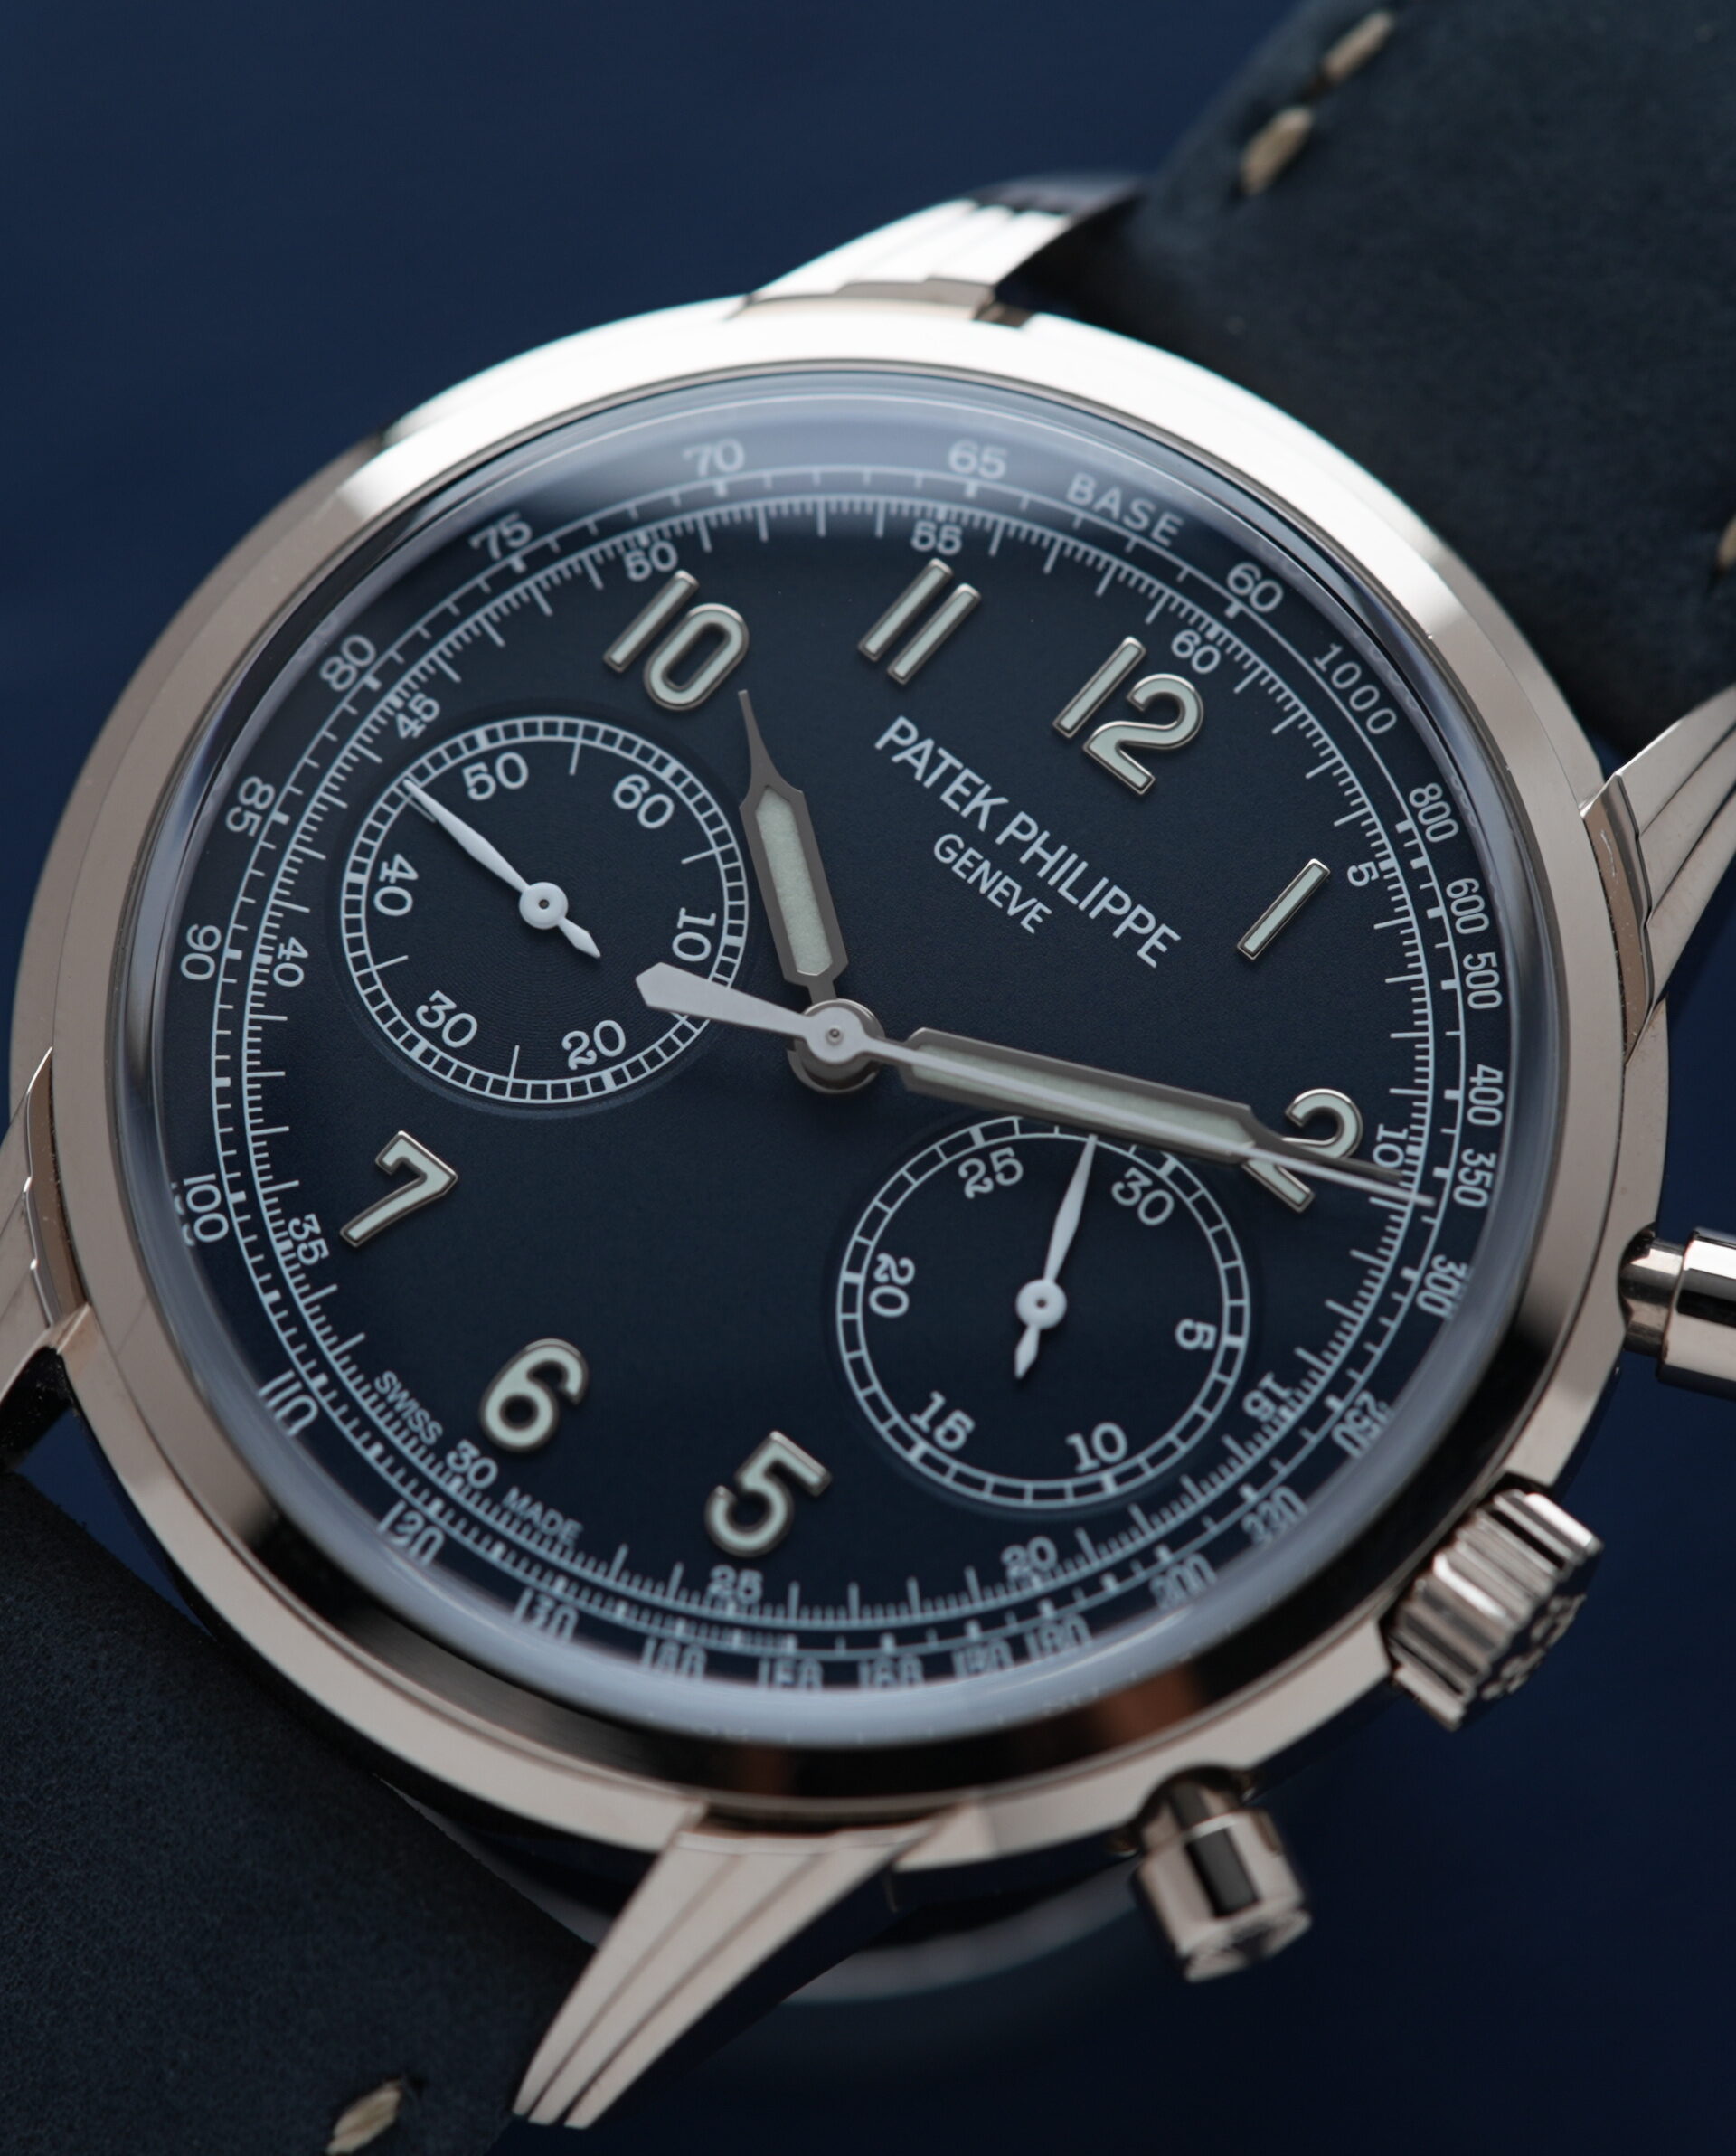 Close up of the dial on the Patek Philippe Chronograph 5172 Complications Chronograph Recently Serviced Seal 5172G-001 White Gold watch.